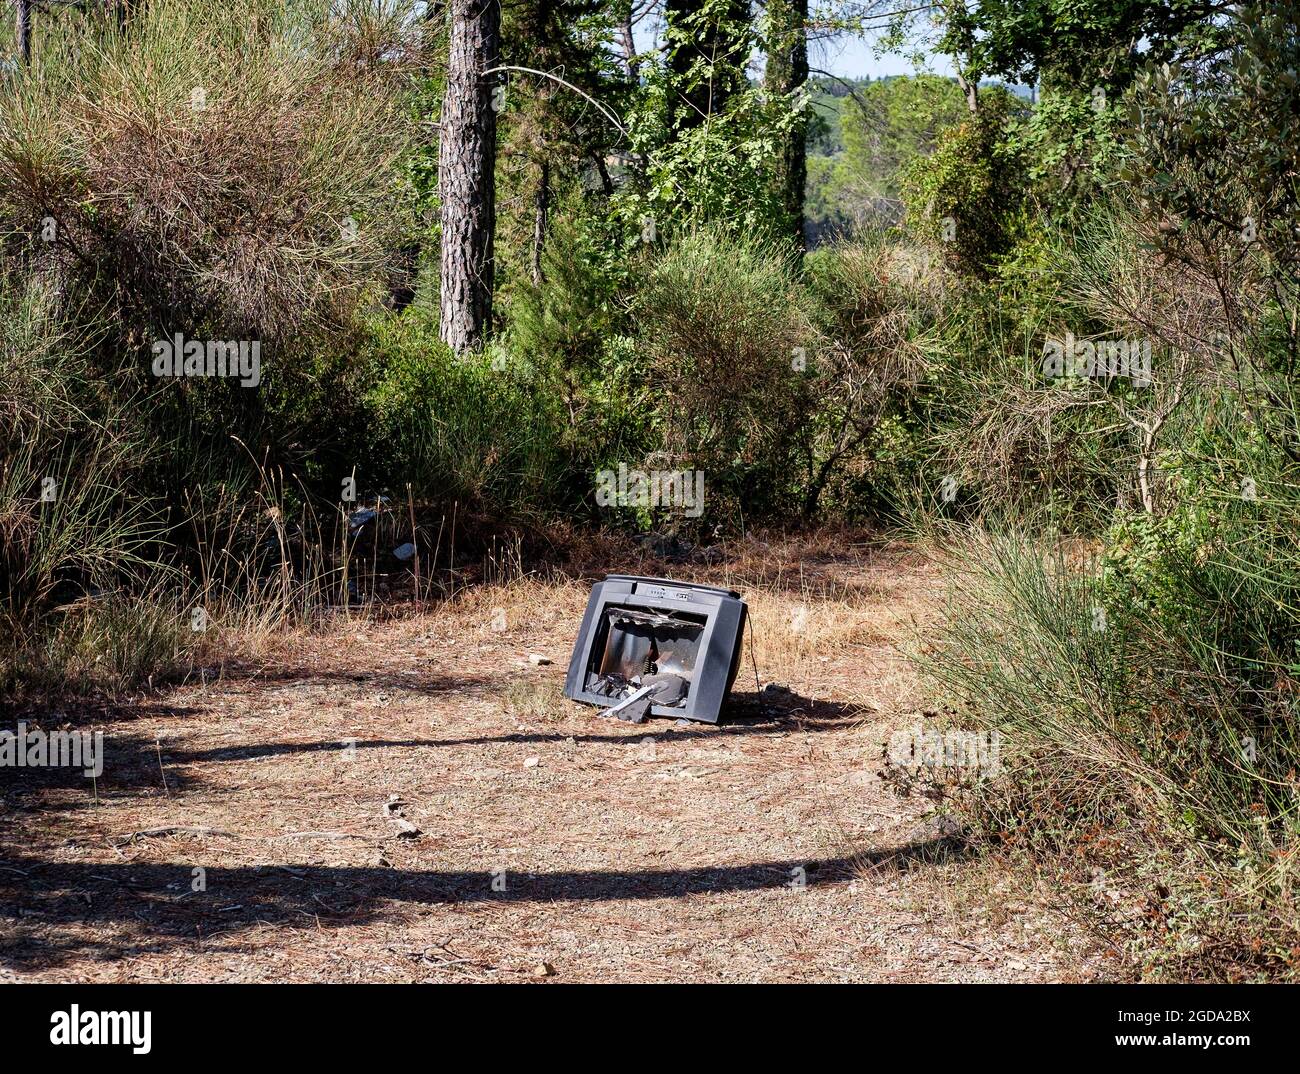 Old broken television abandoned in the bush, Italy Stock Photo